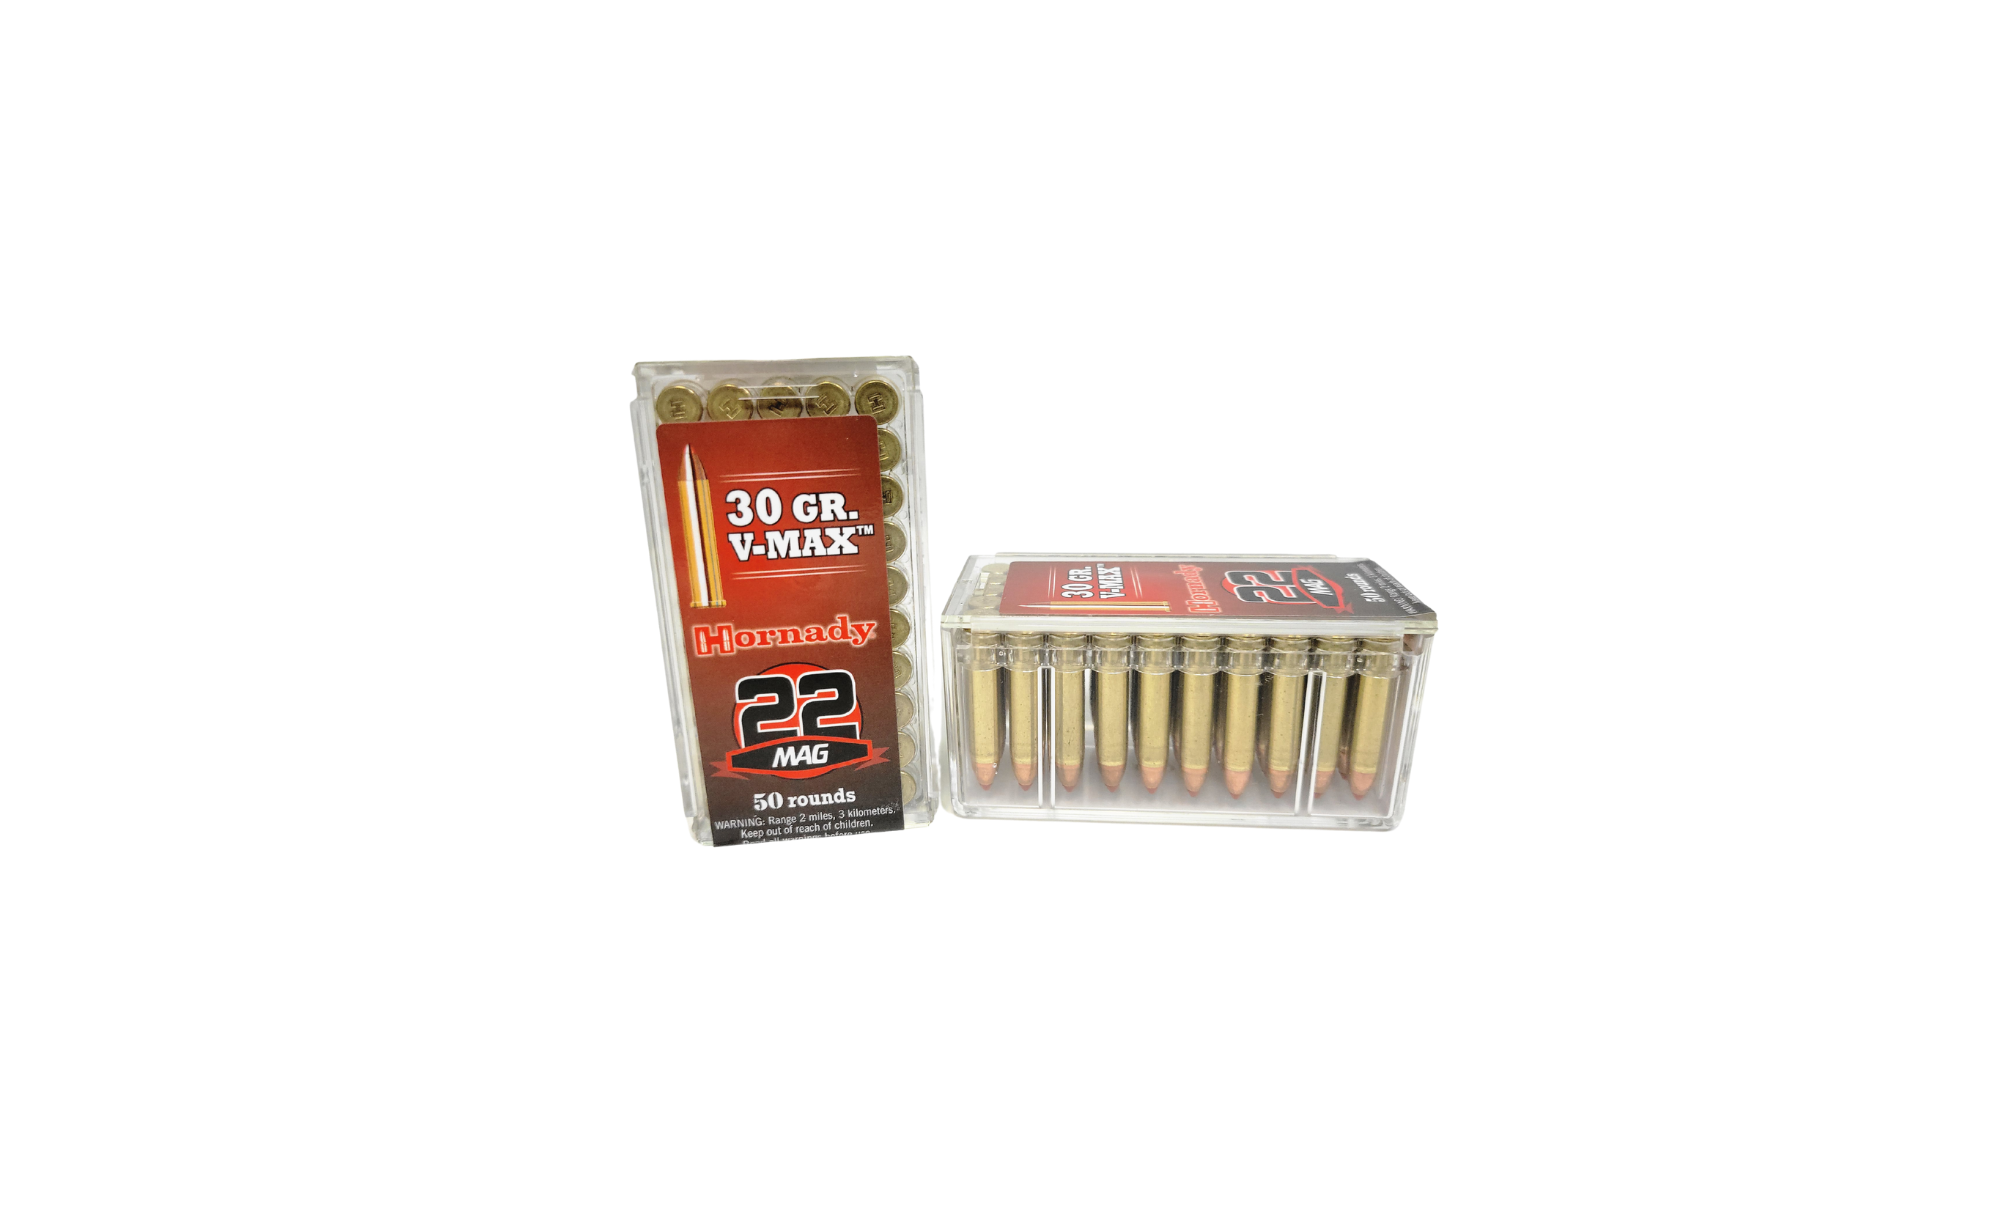 CCI .22 Mag Variety Pack CCI, Federal, Remington – 350 Rounds (7 Boxes) [NO TAX outside Texas] Product Image